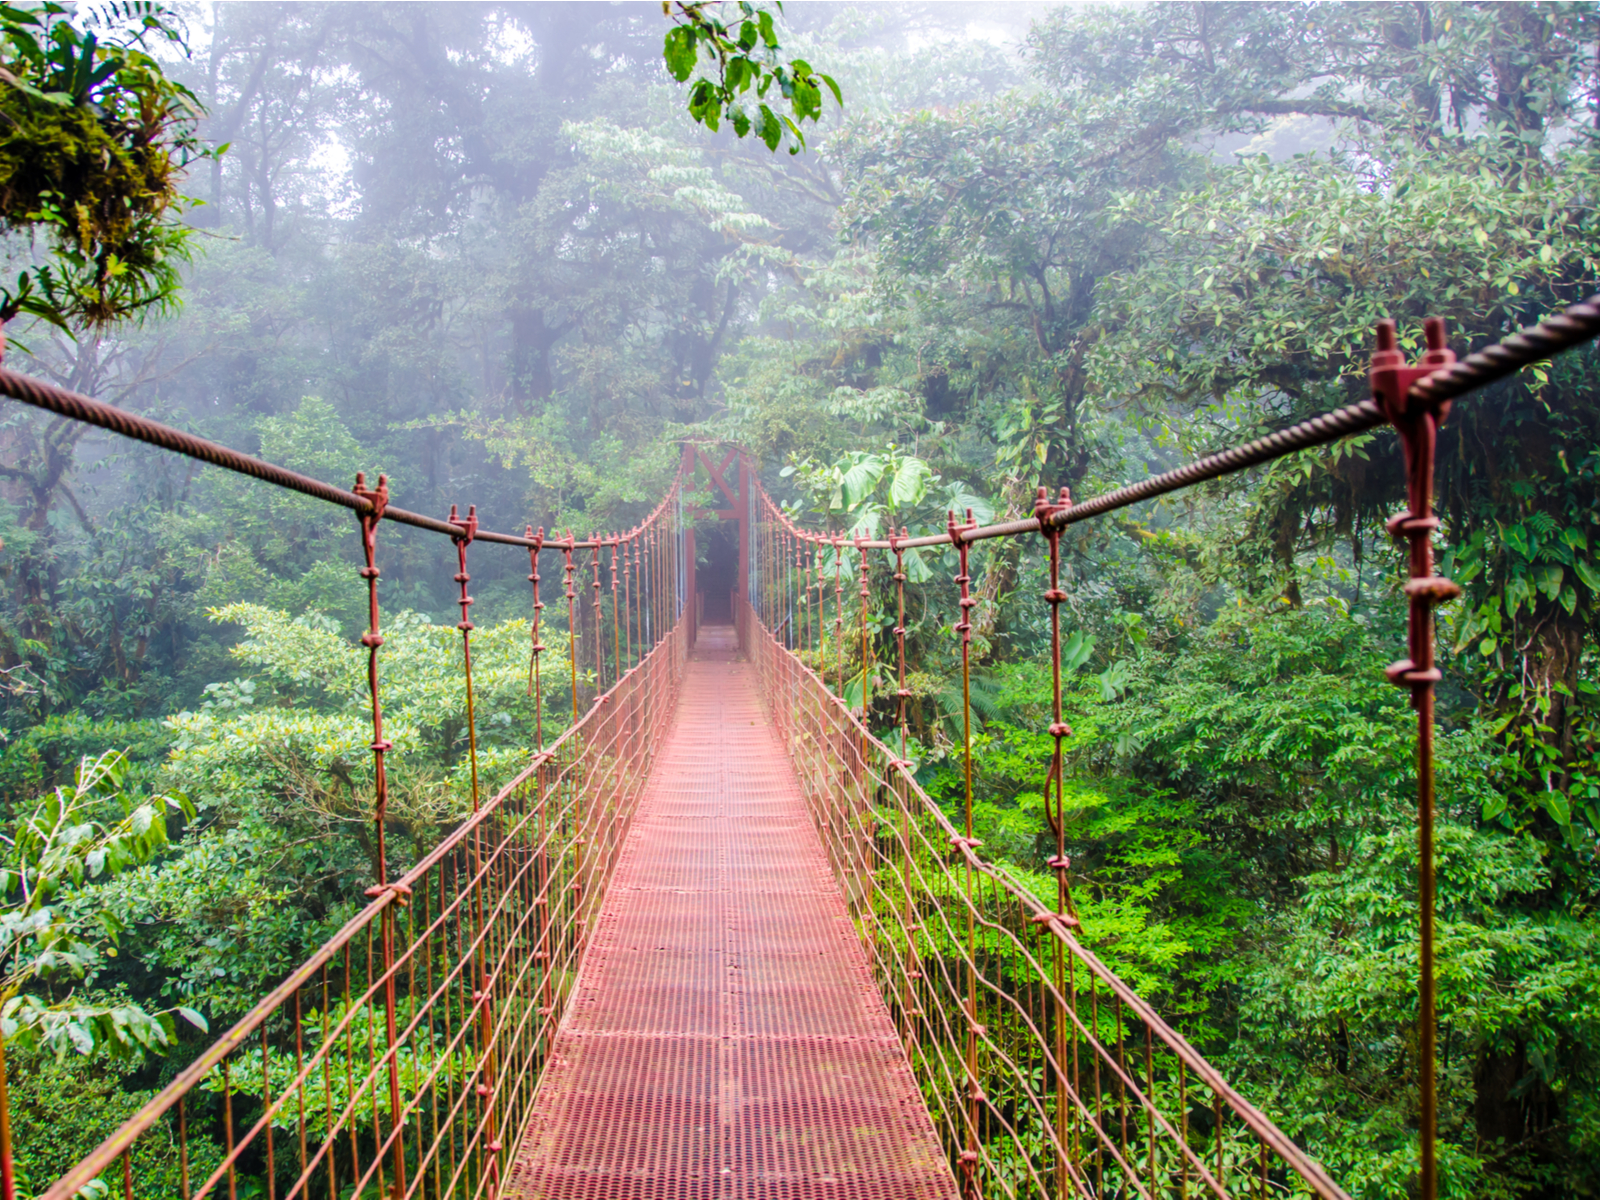 Suspension bridge in Monteverde Cloud Forest Reserve, one of the best hikes in the world